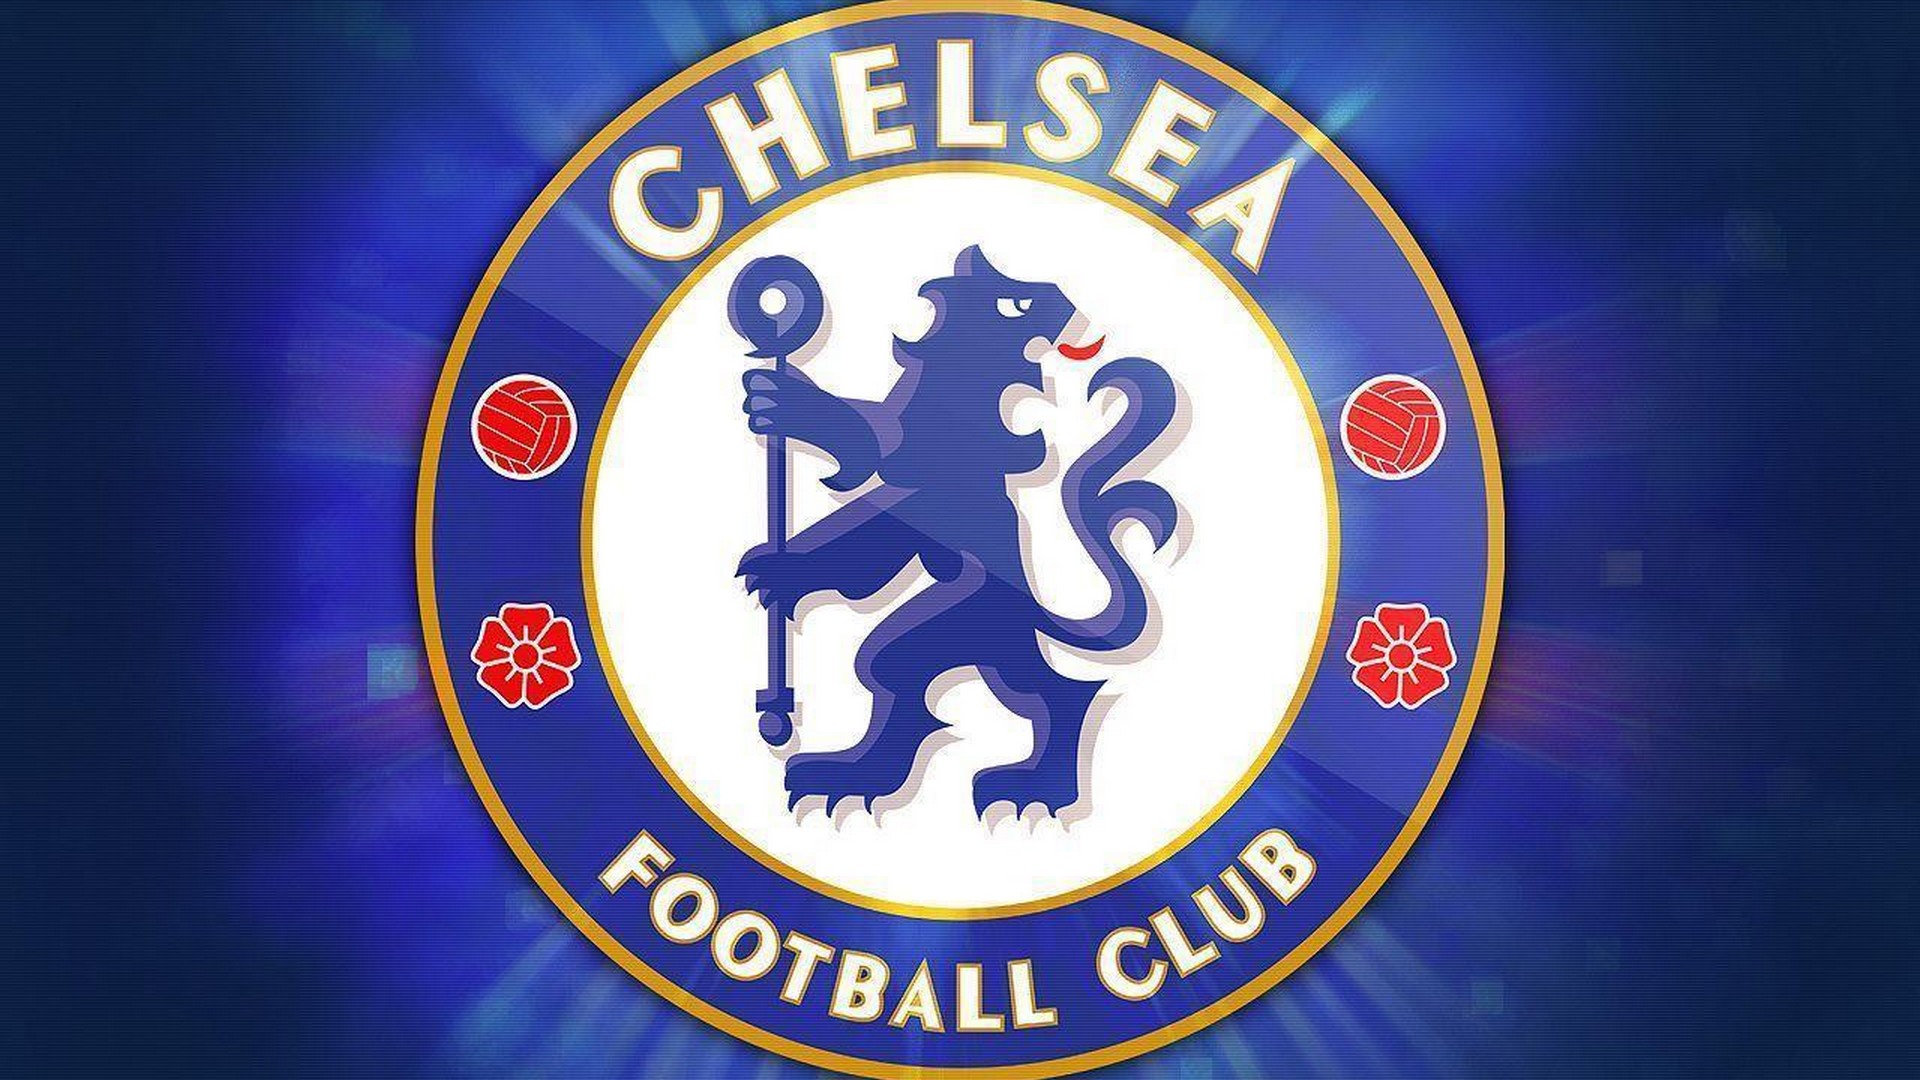 Wallpapers HD Chelsea Logo with high-resolution 1920x1080 pixel. You can use this wallpaper for your Desktop Computers, Mac Screensavers, Windows Backgrounds, iPhone Wallpapers, Tablet or Android Lock screen and another Mobile device